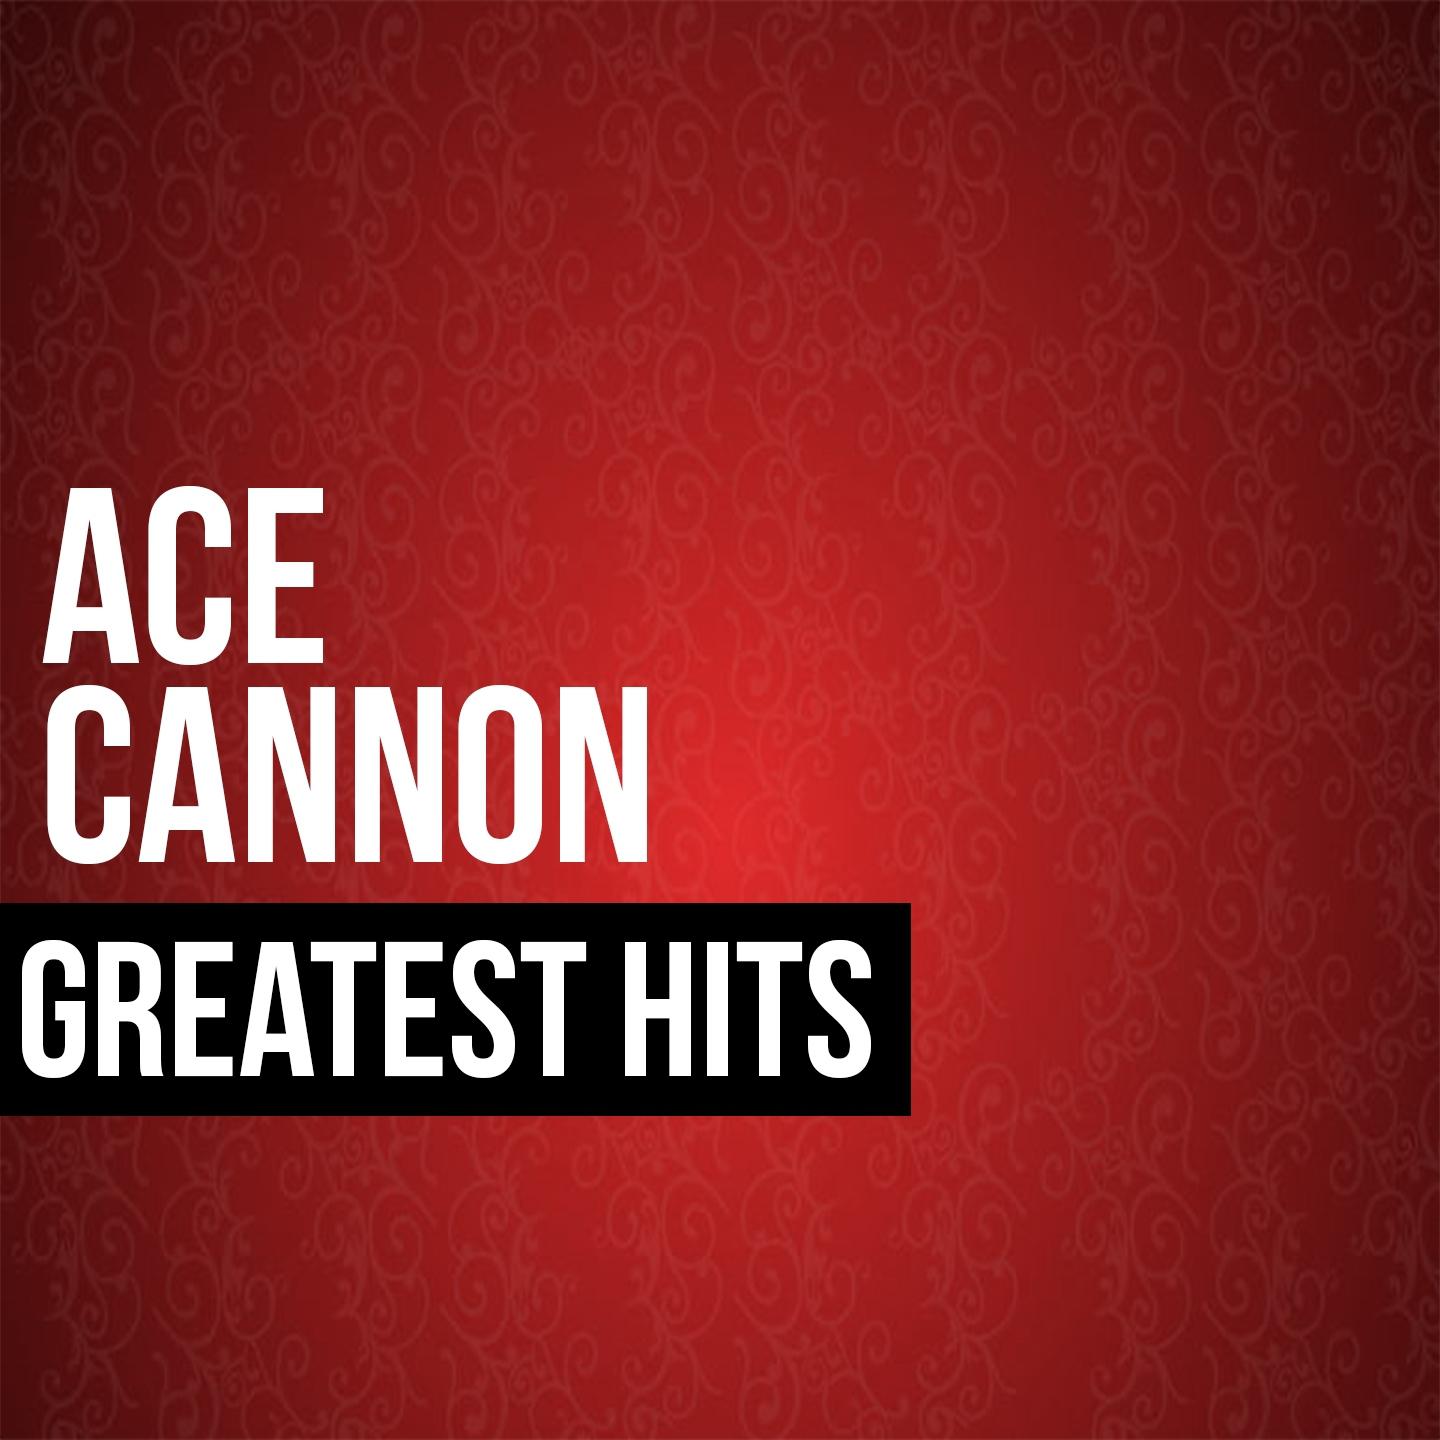 Ace Cannon Greatest Hits